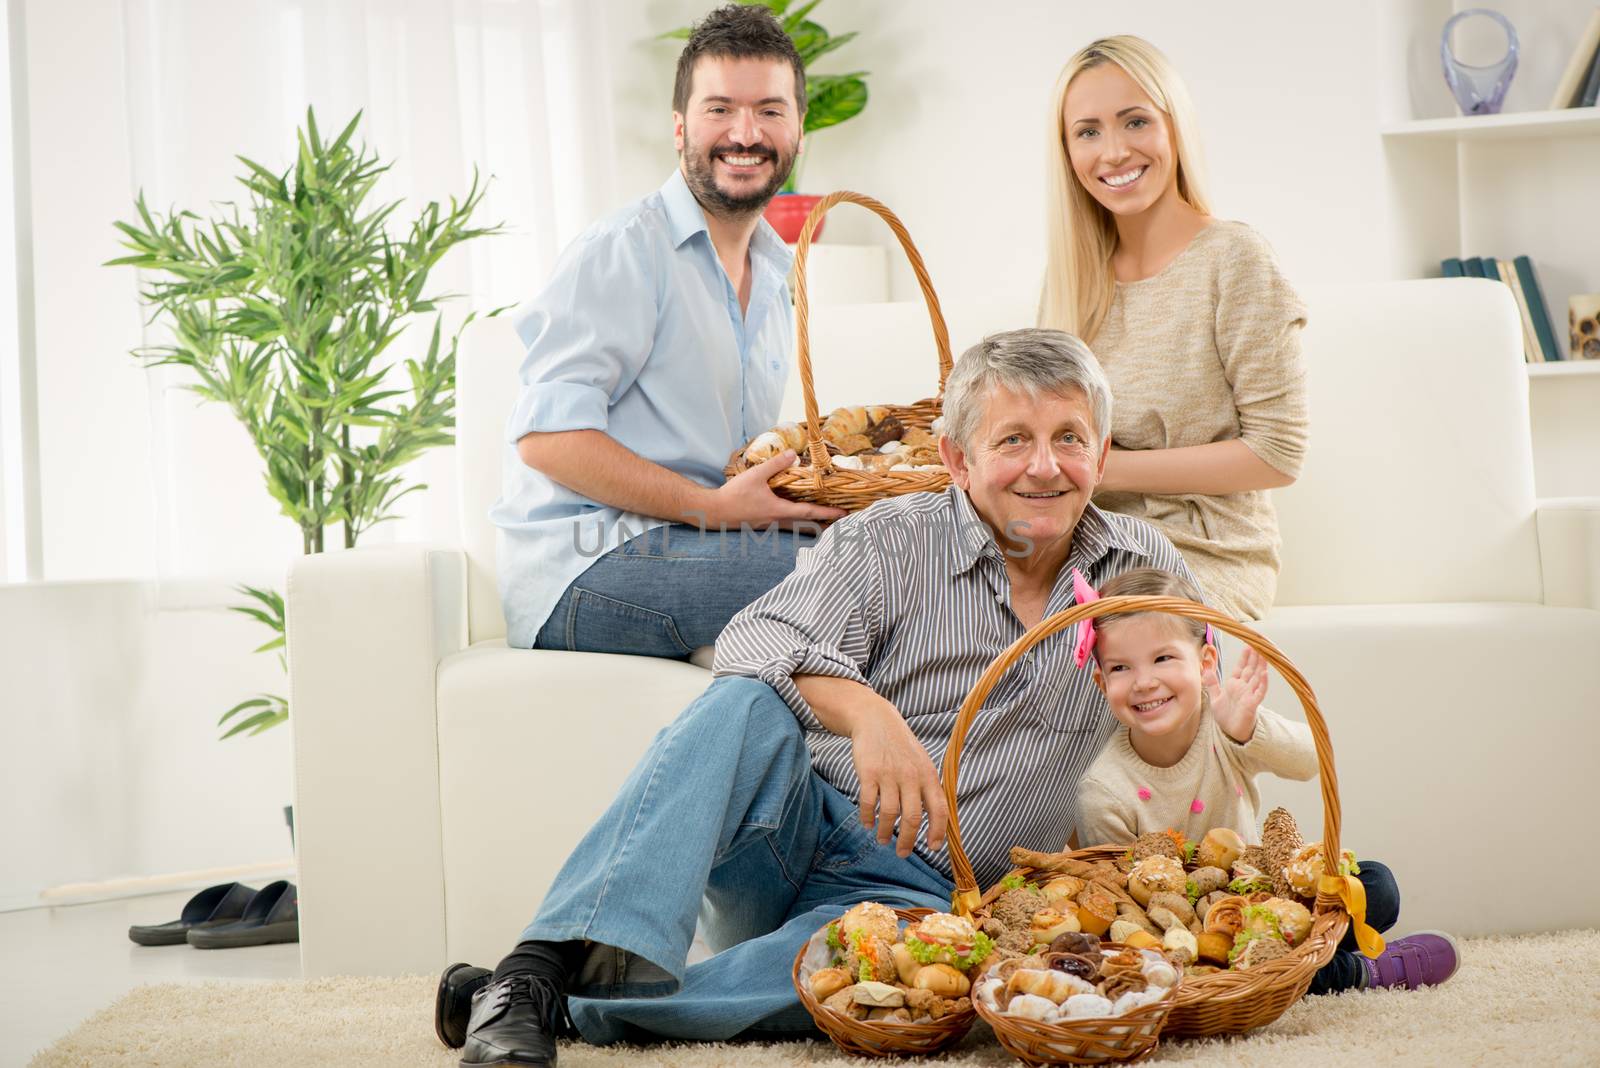 Senior man and a little girl are sitting on the living room floor. In front of them is basket with pastries, and behind them young parents are sitting on the couch. Looking at camera.